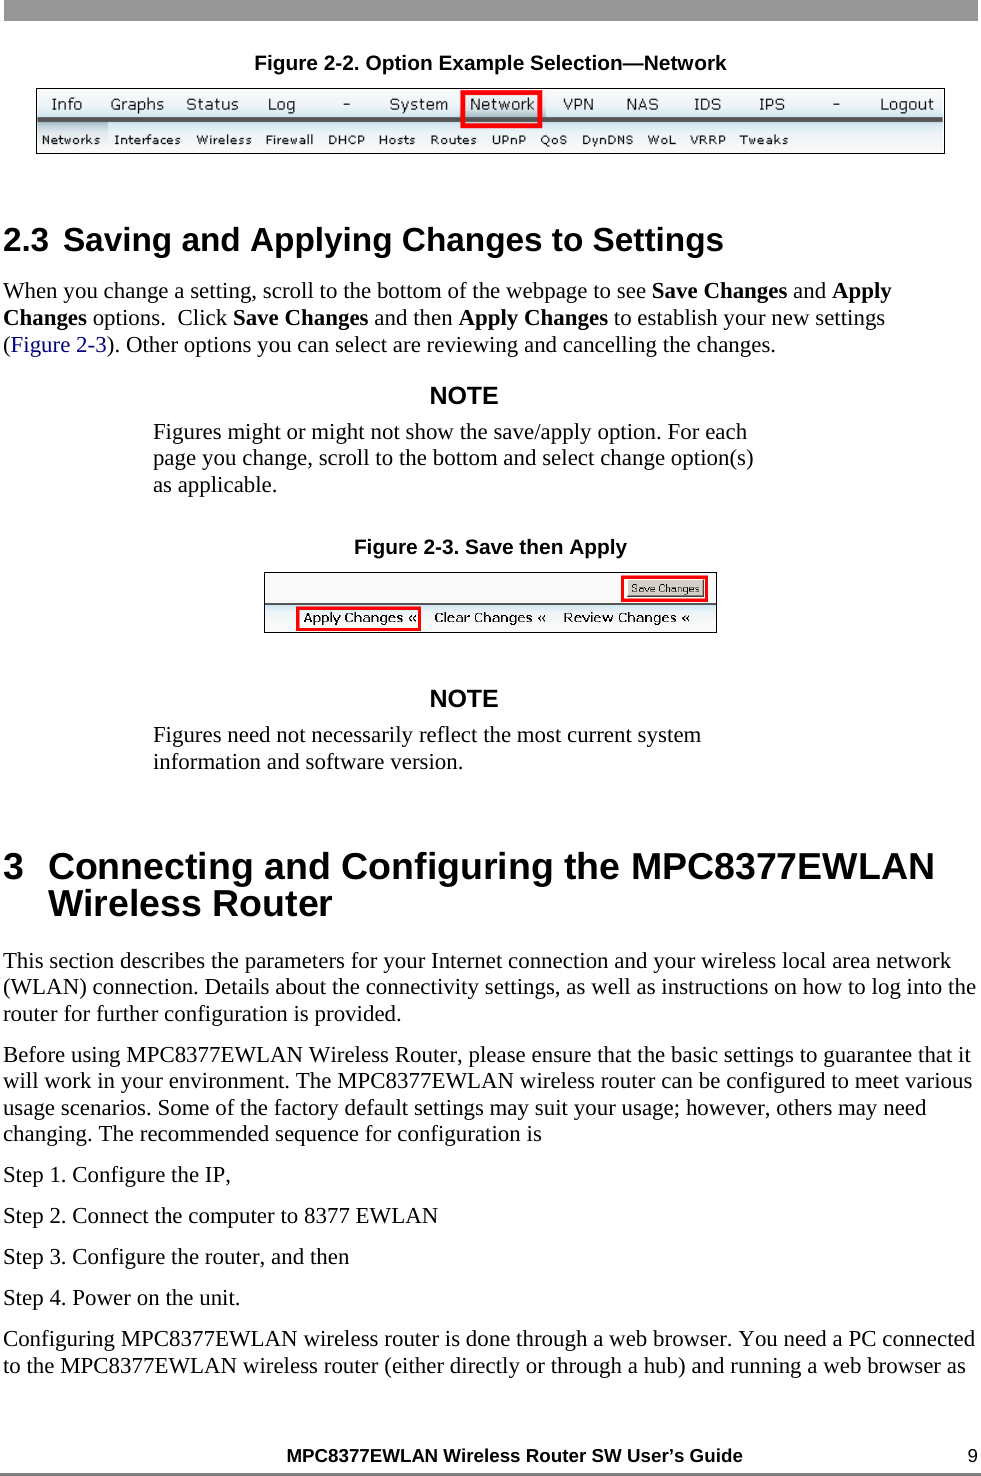                                                          MPC8377EWLAN Wireless Router SW User’s Guide    9 Figure 2-2. Option Example Selection—Network  2.3 Saving and Applying Changes to Settings When you change a setting, scroll to the bottom of the webpage to see Save Changes and Apply Changes options.  Click Save Changes and then Apply Changes to establish your new settings           (Figure 2-3). Other options you can select are reviewing and cancelling the changes. NOTE Figures might or might not show the save/apply option. For each page you change, scroll to the bottom and select change option(s) as applicable. Figure 2-3. Save then Apply  NOTE Figures need not necessarily reflect the most current system information and software version. 3  Connecting and Configuring the MPC8377EWLAN Wireless Router This section describes the parameters for your Internet connection and your wireless local area network (WLAN) connection. Details about the connectivity settings, as well as instructions on how to log into the router for further configuration is provided. Before using MPC8377EWLAN Wireless Router, please ensure that the basic settings to guarantee that it will work in your environment. The MPC8377EWLAN wireless router can be configured to meet various usage scenarios. Some of the factory default settings may suit your usage; however, others may need changing. The recommended sequence for configuration is  Step 1. Configure the IP,  Step 2. Connect the computer to 8377 EWLAN Step 3. Configure the router, and then  Step 4. Power on the unit. Configuring MPC8377EWLAN wireless router is done through a web browser. You need a PC connected to the MPC8377EWLAN wireless router (either directly or through a hub) and running a web browser as 